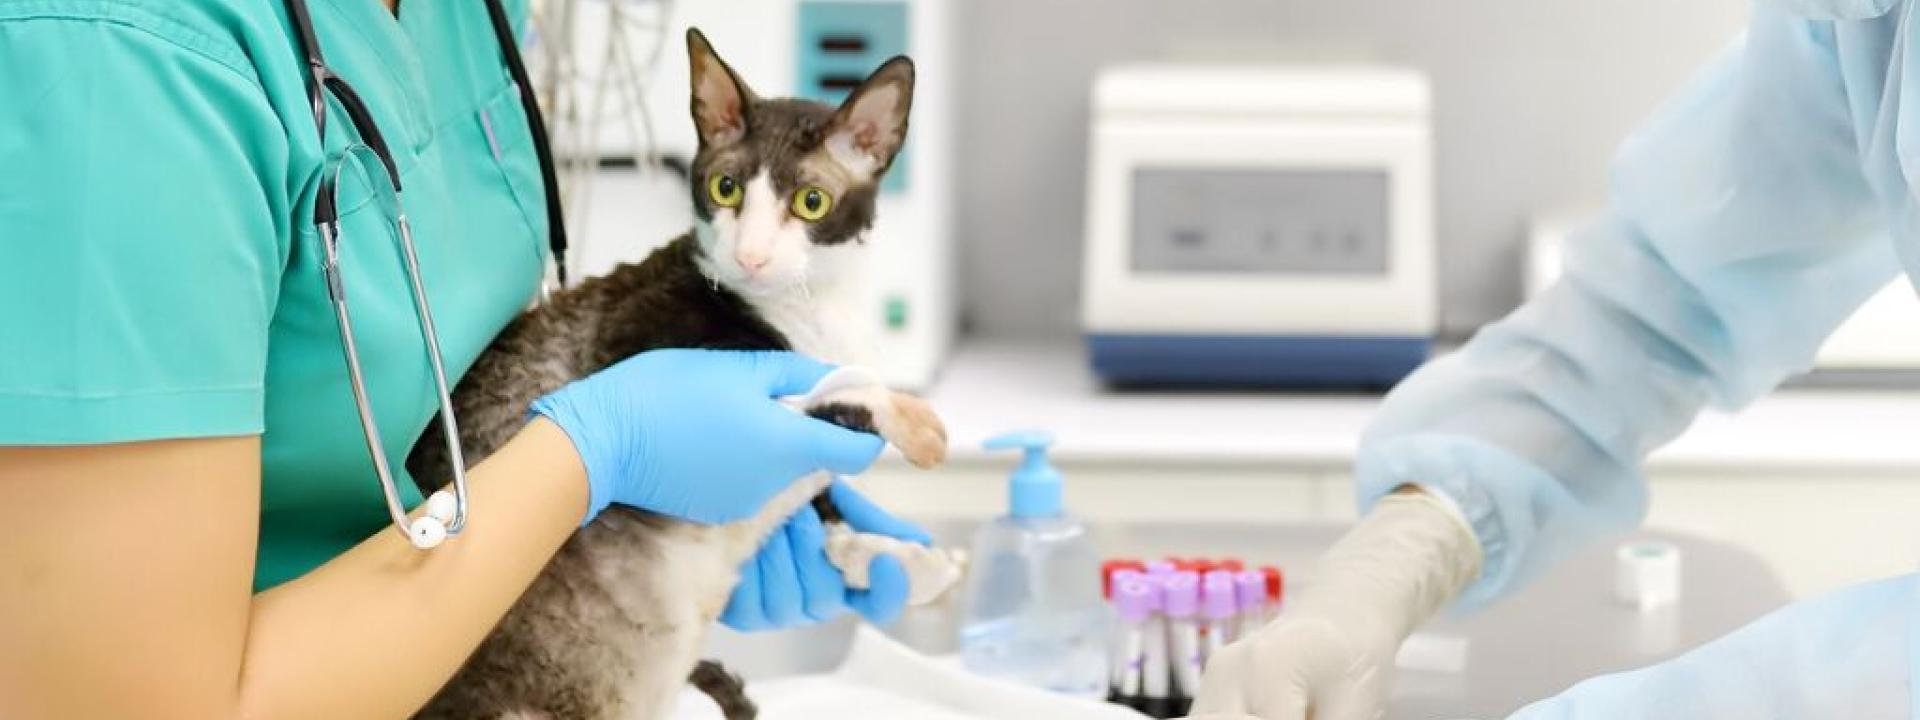 Veterinarian performing blood laboratory tests for cat.